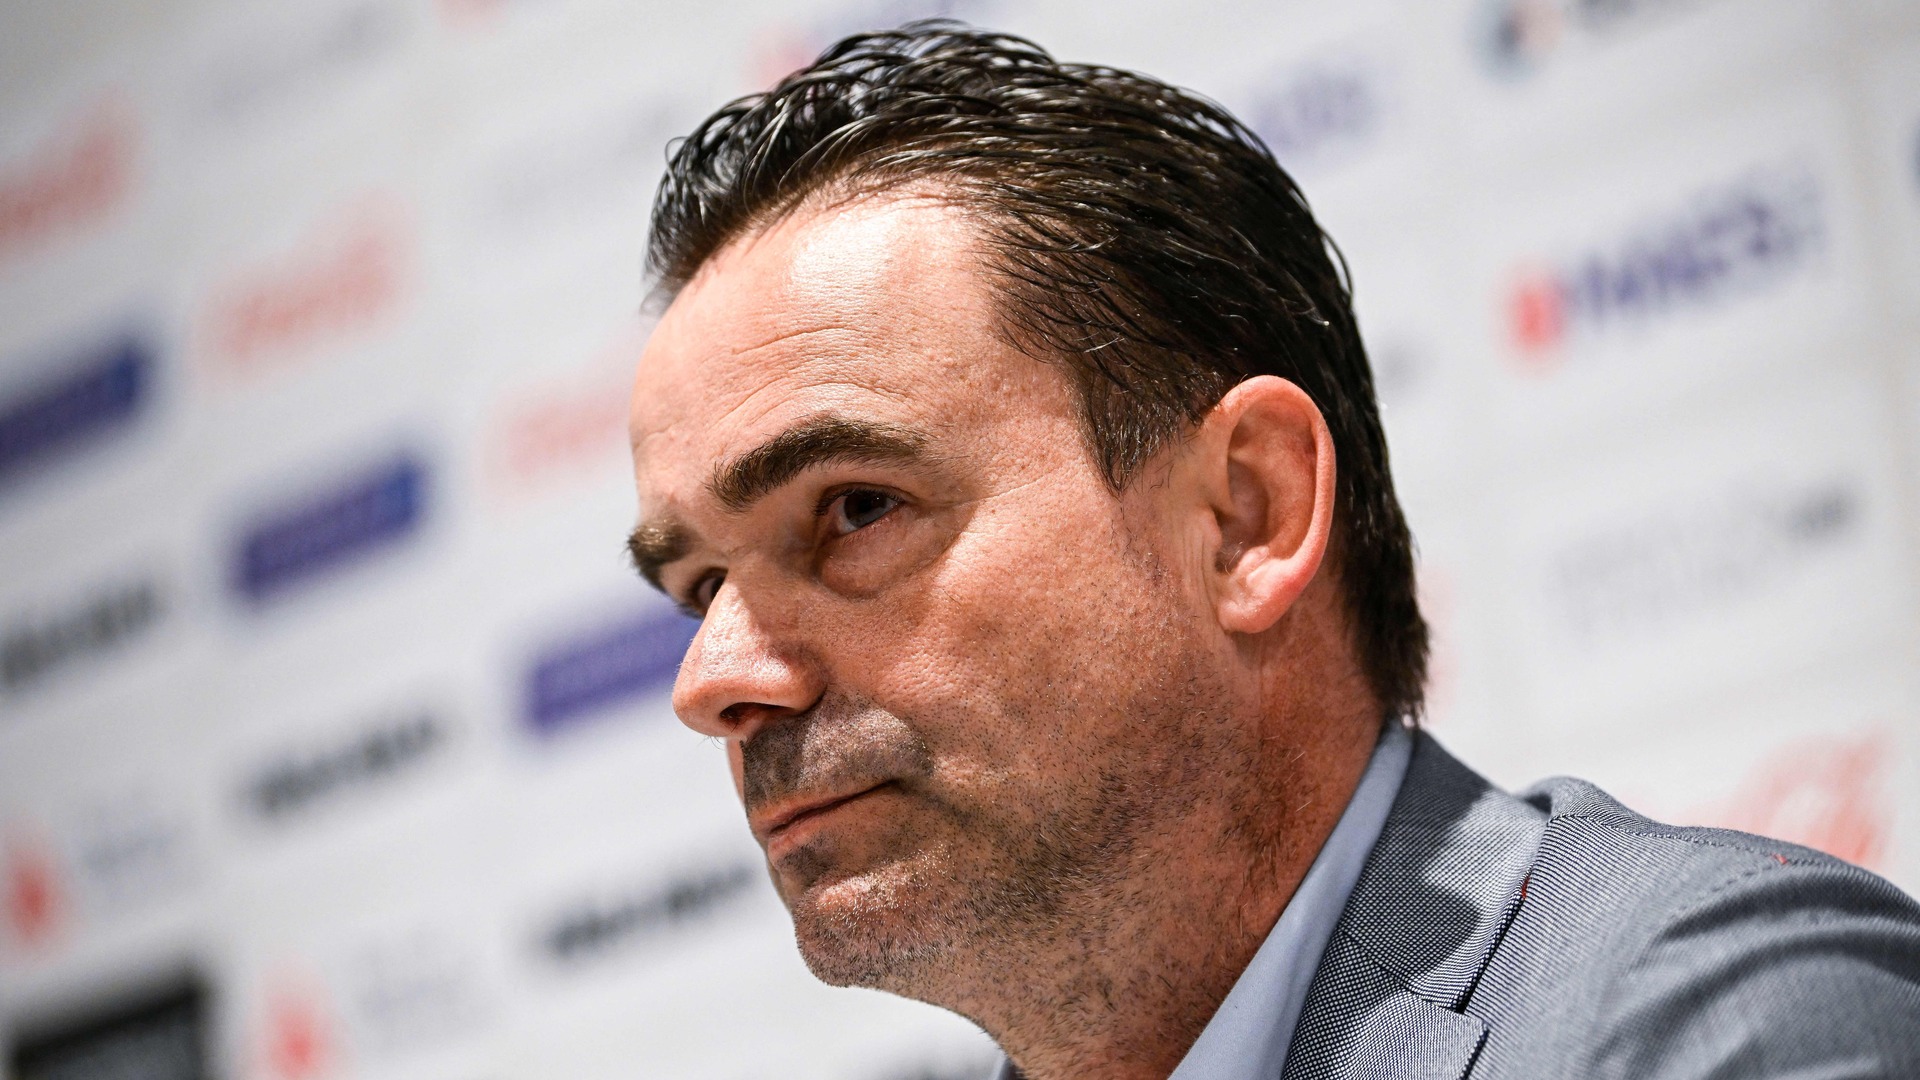 Overmars suffers 'mild stroke' as Ajax sends supportive message